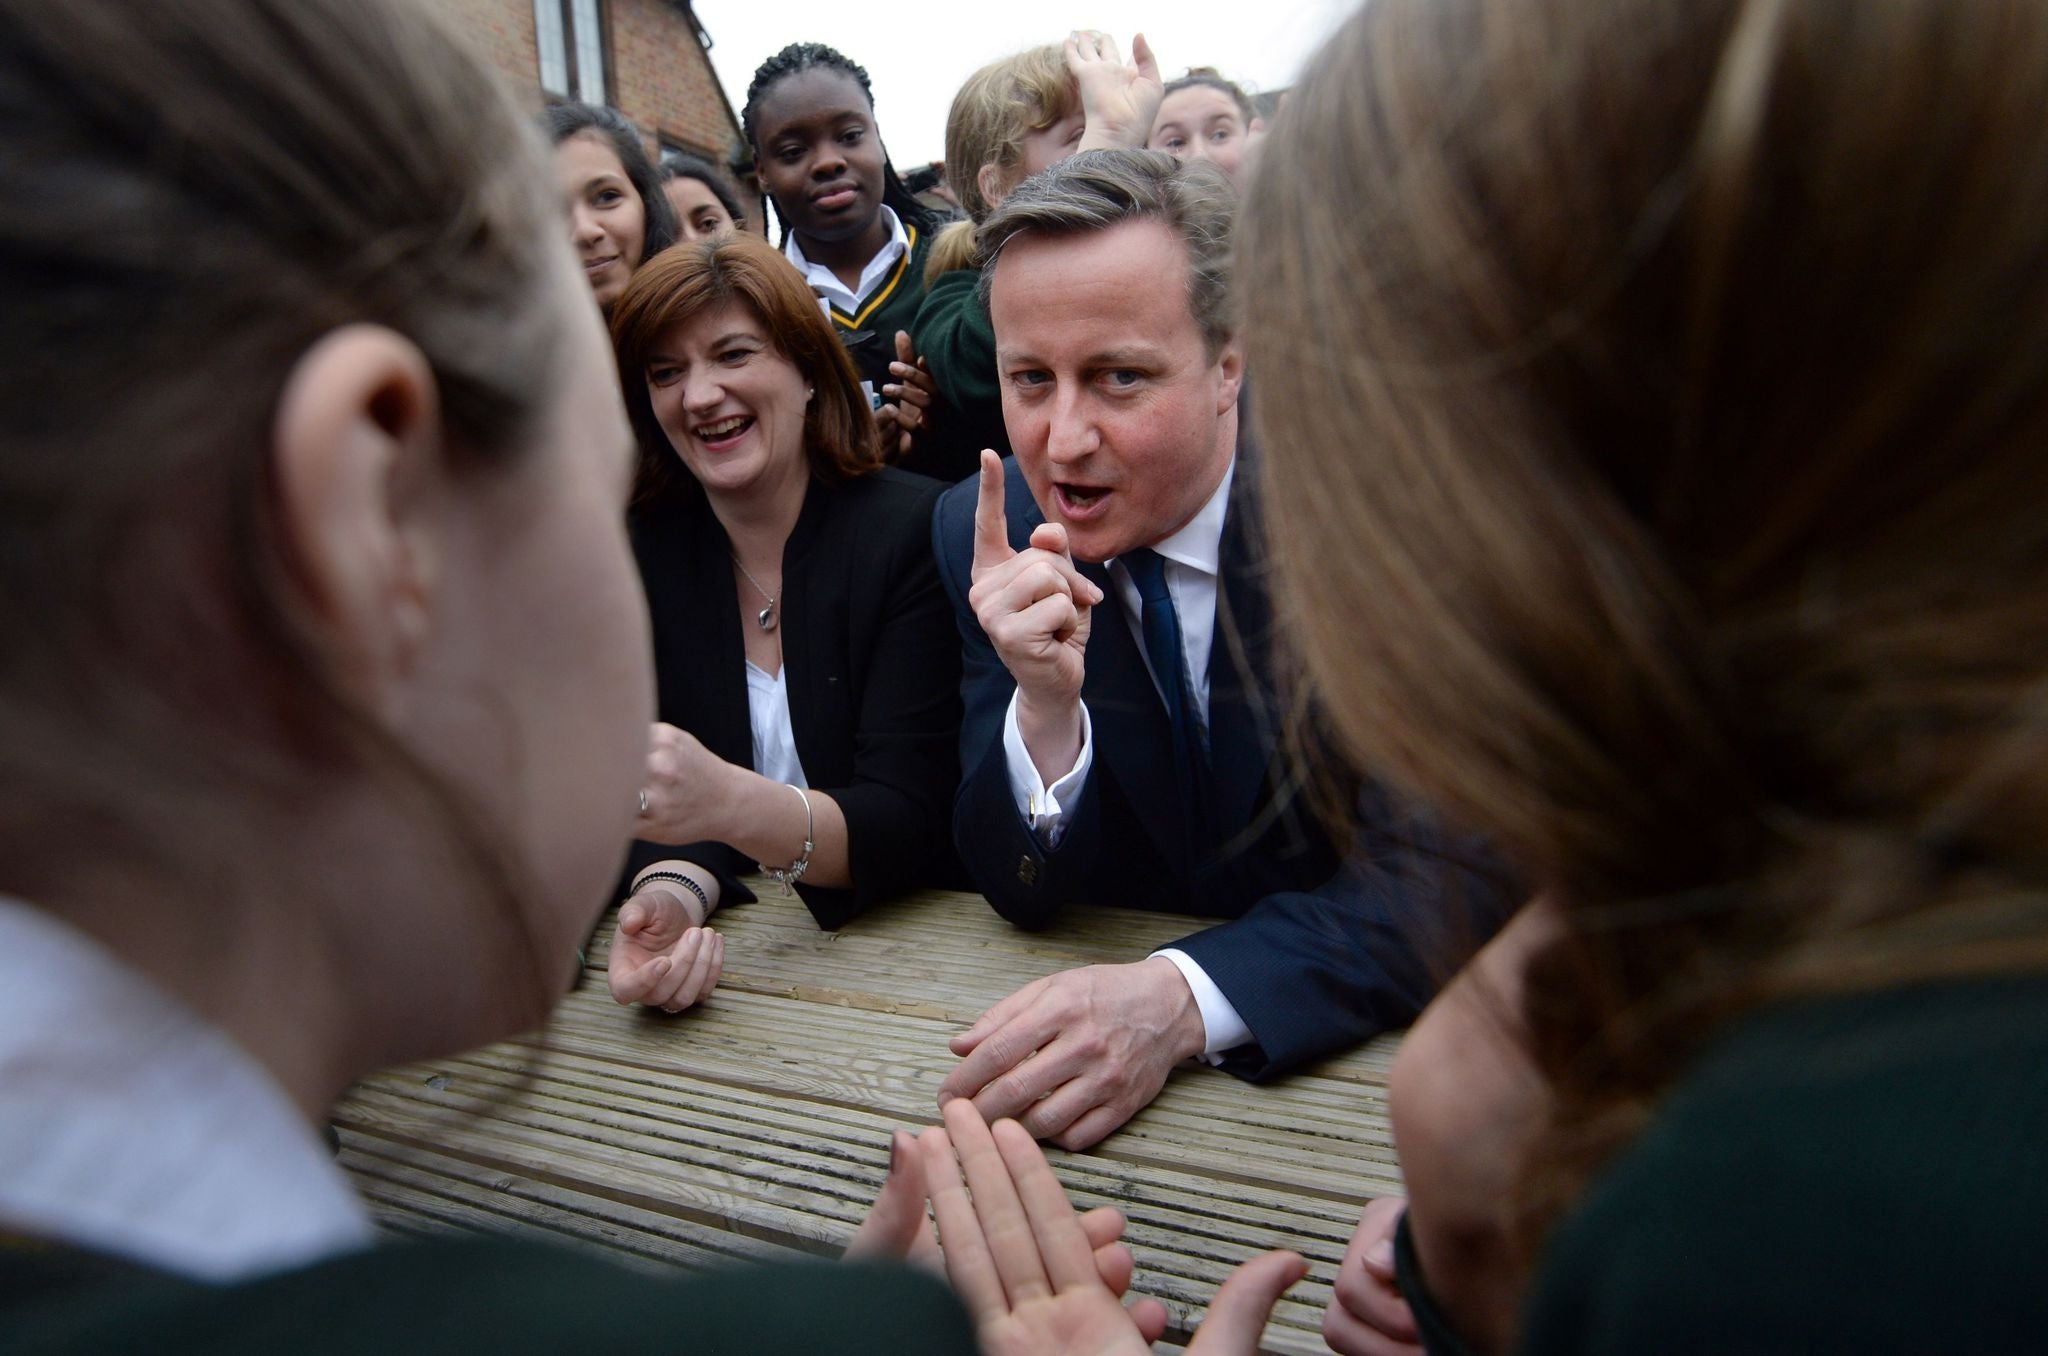 Education secretary Nicky Morgan and Prime Minister David Cameron meet pupils at a London school after announcing their pledge to open 500 more free schools over the course of the next parliament.